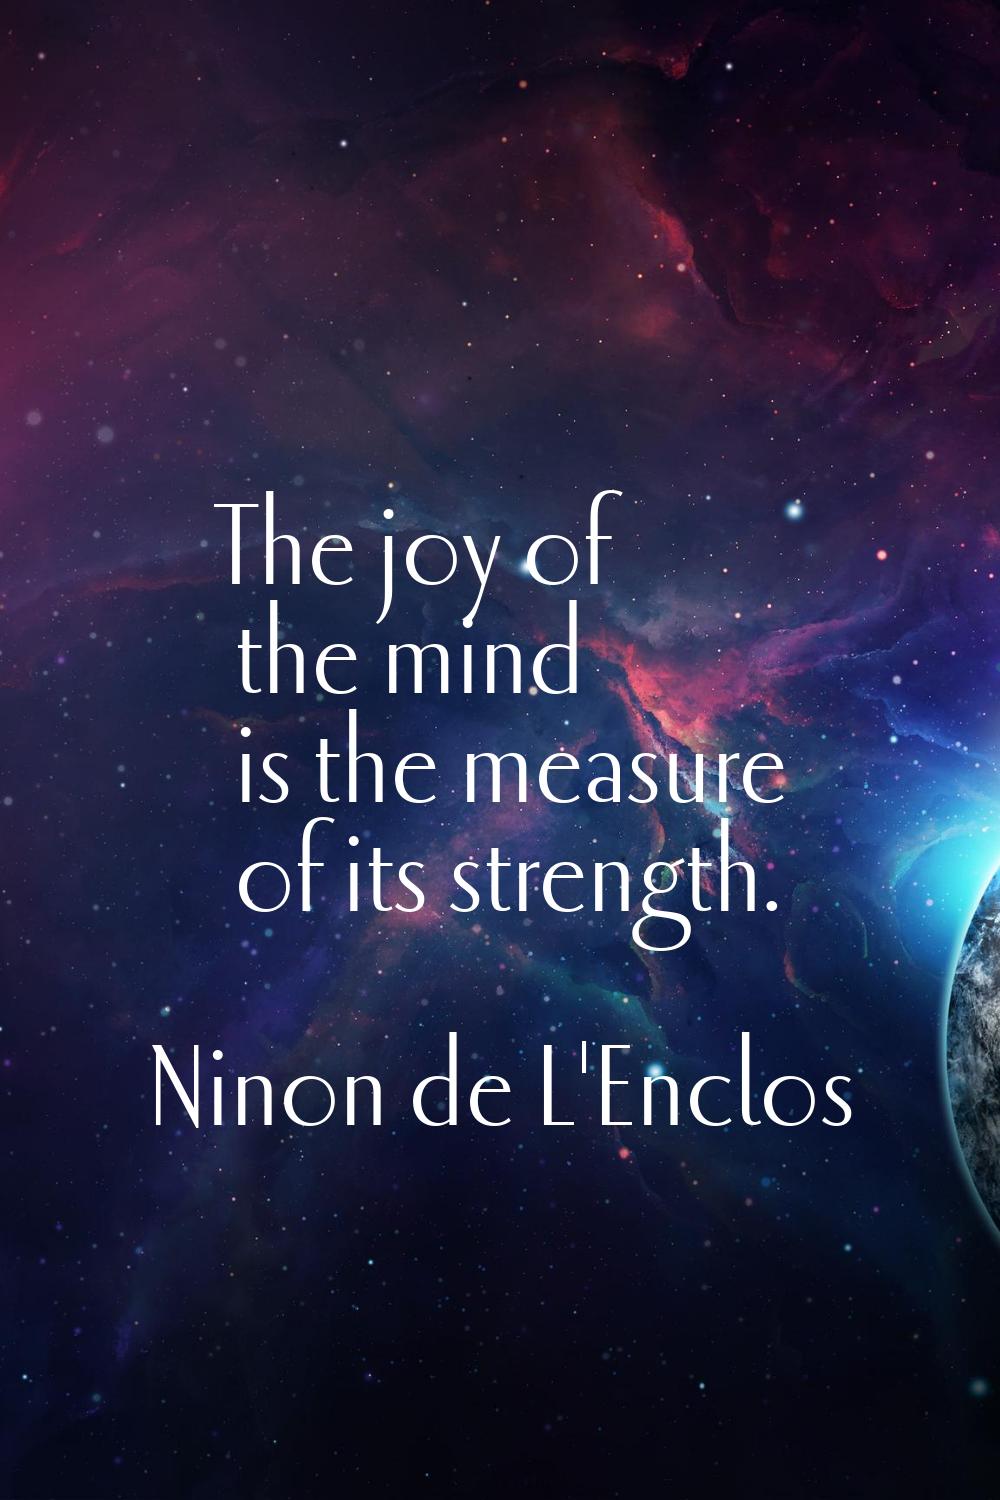 The joy of the mind is the measure of its strength.